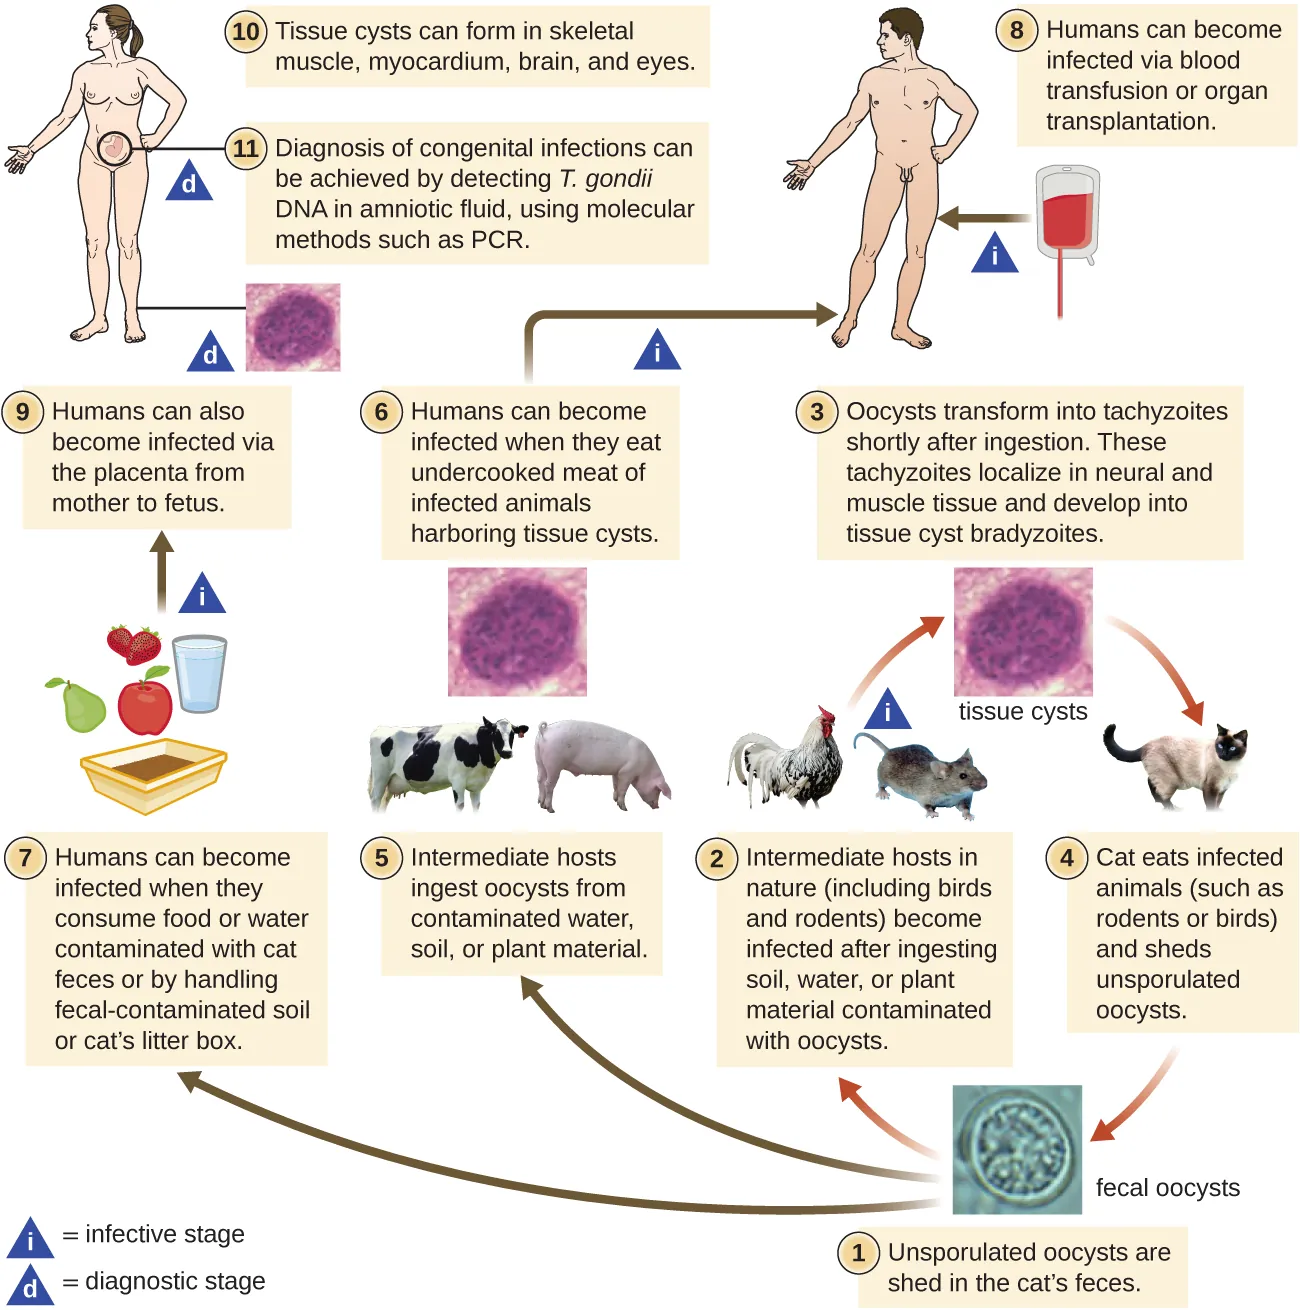 Life cycle of Toxoplasma gondii. 1 - Insporulated oocysts are shed in the cat’s feces. 2 – Intermediate host in nature (including birds and rodents) become infected after ingesting soil, water or plant material contaminated with oocysts. 3 – Oocysts transform into tachyzoites shortly after ingestion. These tachyzoites localize in neural and muscle tissue and develop into tissue cyst bradyzoites. 4 - Cats eat infected animals (such as rodents or birsds) and shed unsporulated oocysts. 5 – Intermediate hosts (such as pigs and cows) ingeset oocysts from contaminated water, soil, or plant material. 6 – Humans can become infected when they eat undercooked meat of infected animals harboring tissue cysts. 7 – Humans can also become infected when they consume food or water contaminate with cat feces or by handling fecal-contaminated soil or cat’s litter box. 8 – Humans can also become infected via the placenta from fetus to mother. 10 – Tissue cysts can form in skeletal muscle, myocardium, brain, and eyes. 11 – Diagnosis of congenital infection can be achieved by detecting T. gondii DNA in amniotic fluid using molecular methods such as PCR.